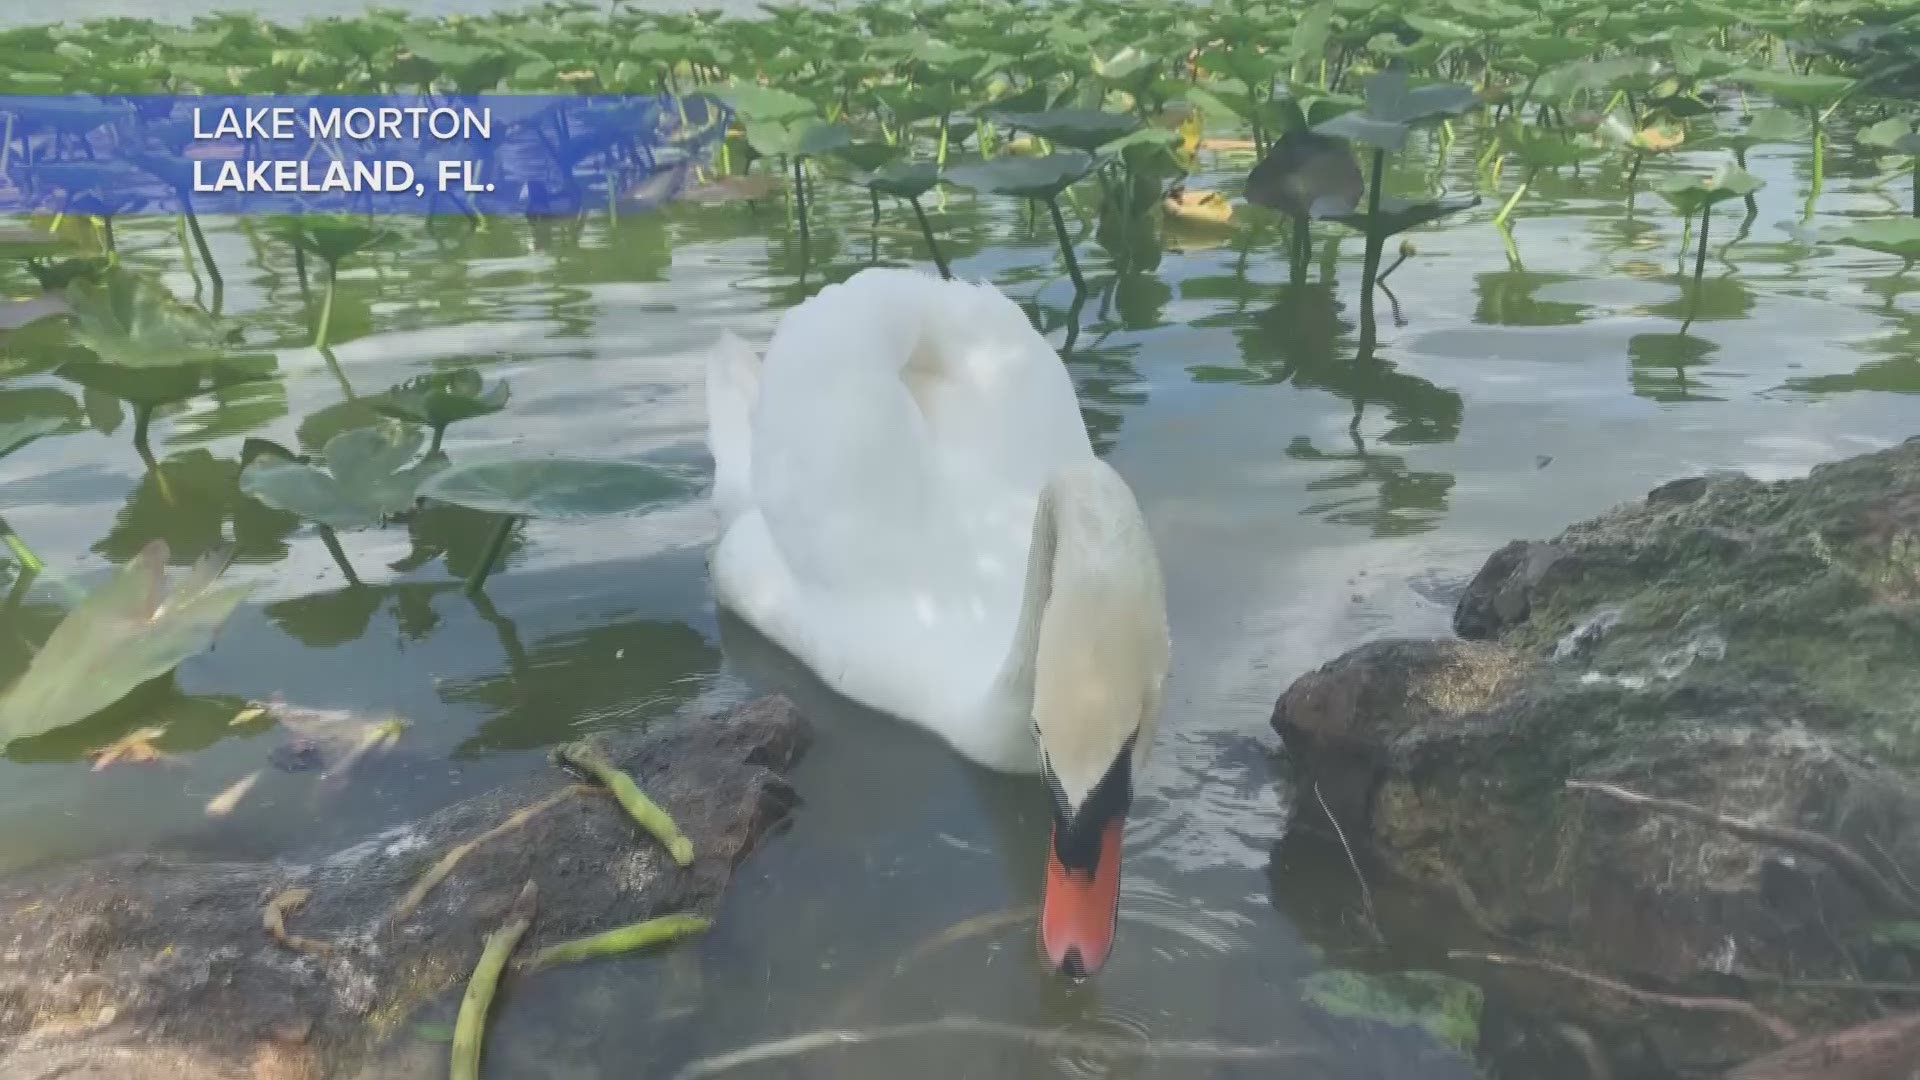 The swans at Lake Morton in Polk County, Florida are a staple of the community.